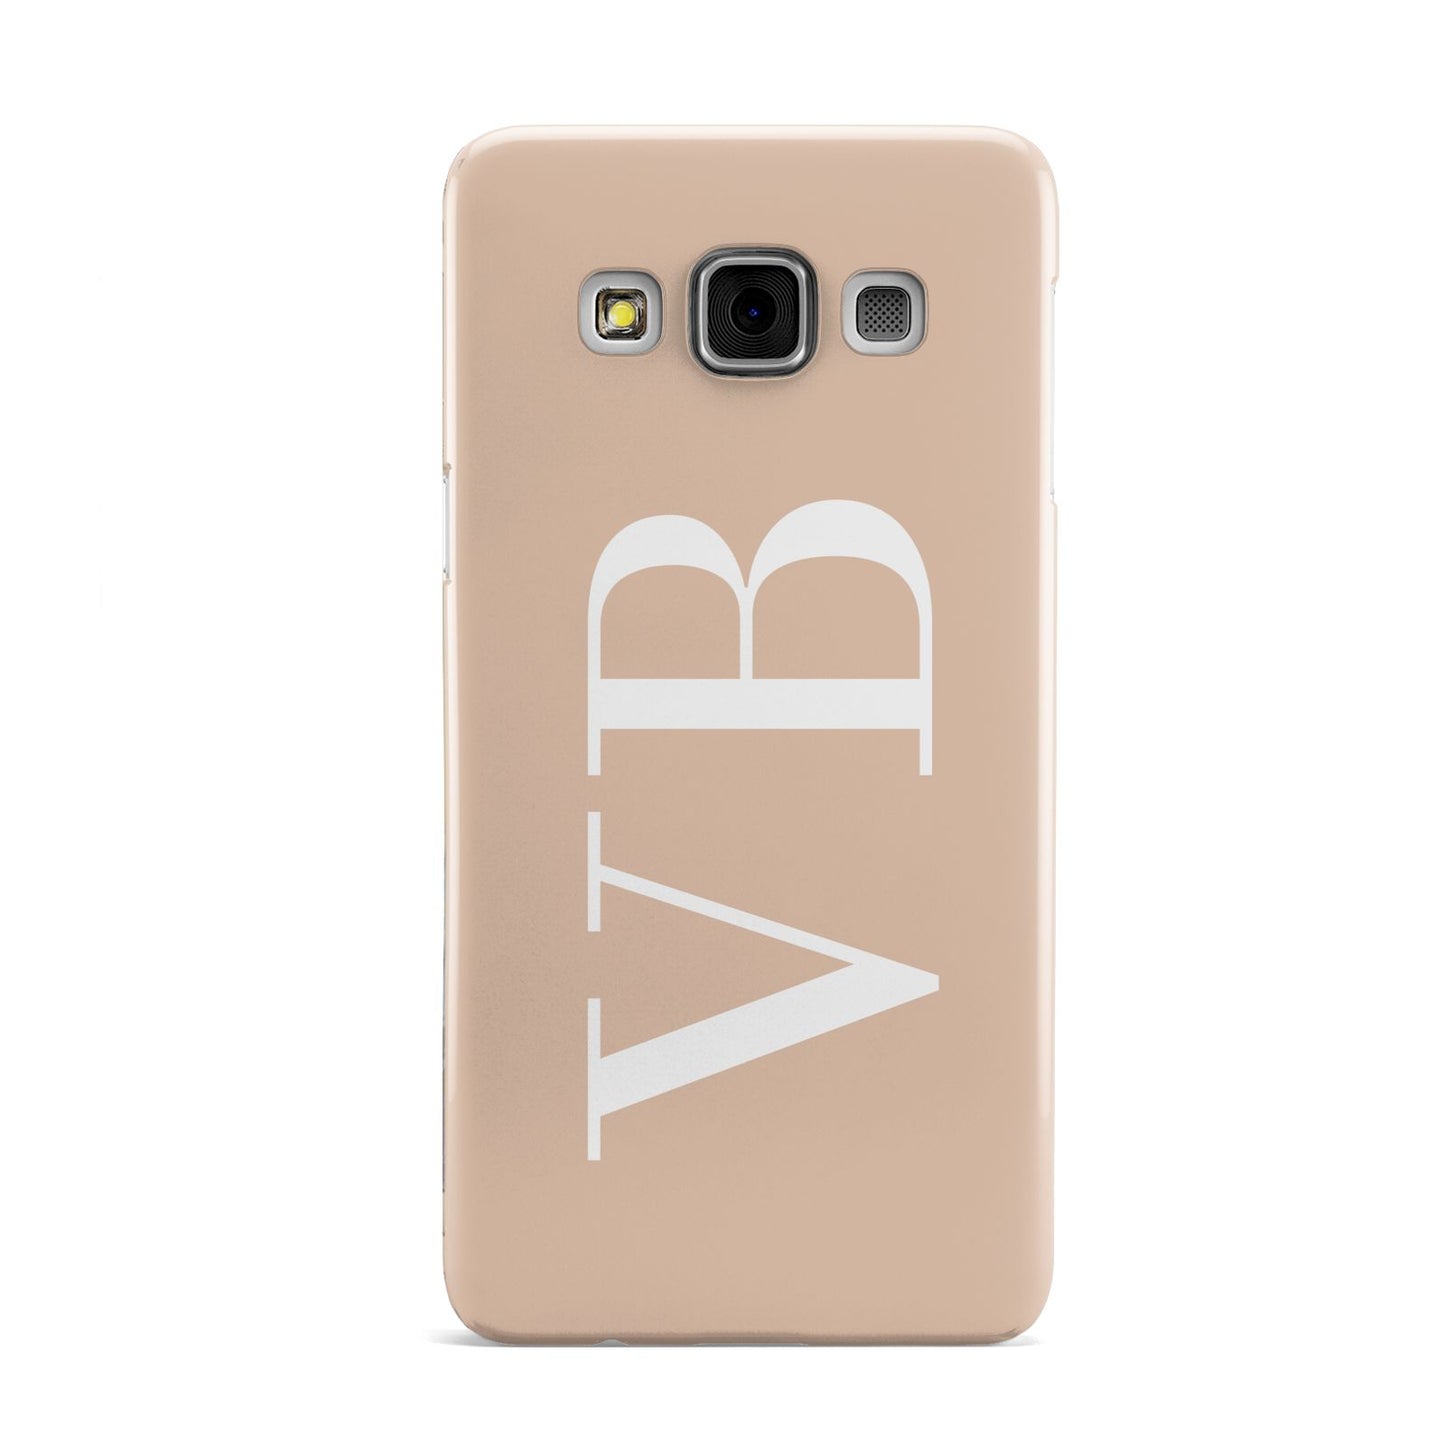 Nude And White Personalised Samsung Galaxy A3 Case